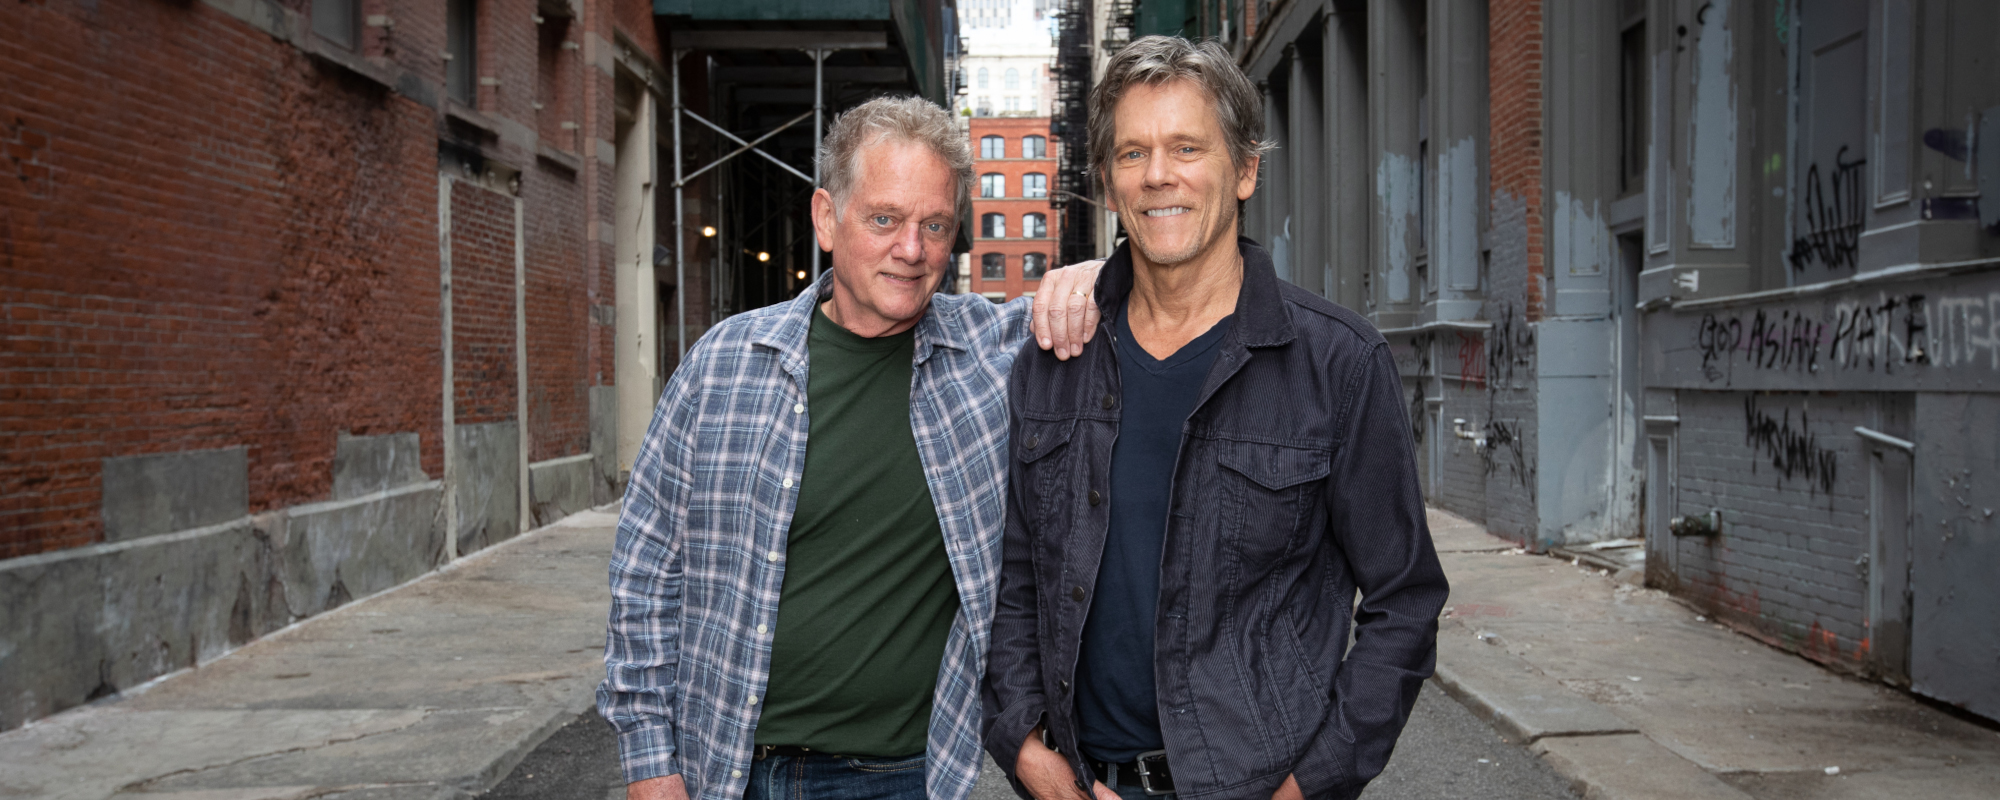 The Bacon Brothers Keep Evolving with New EP, ‘Erato’